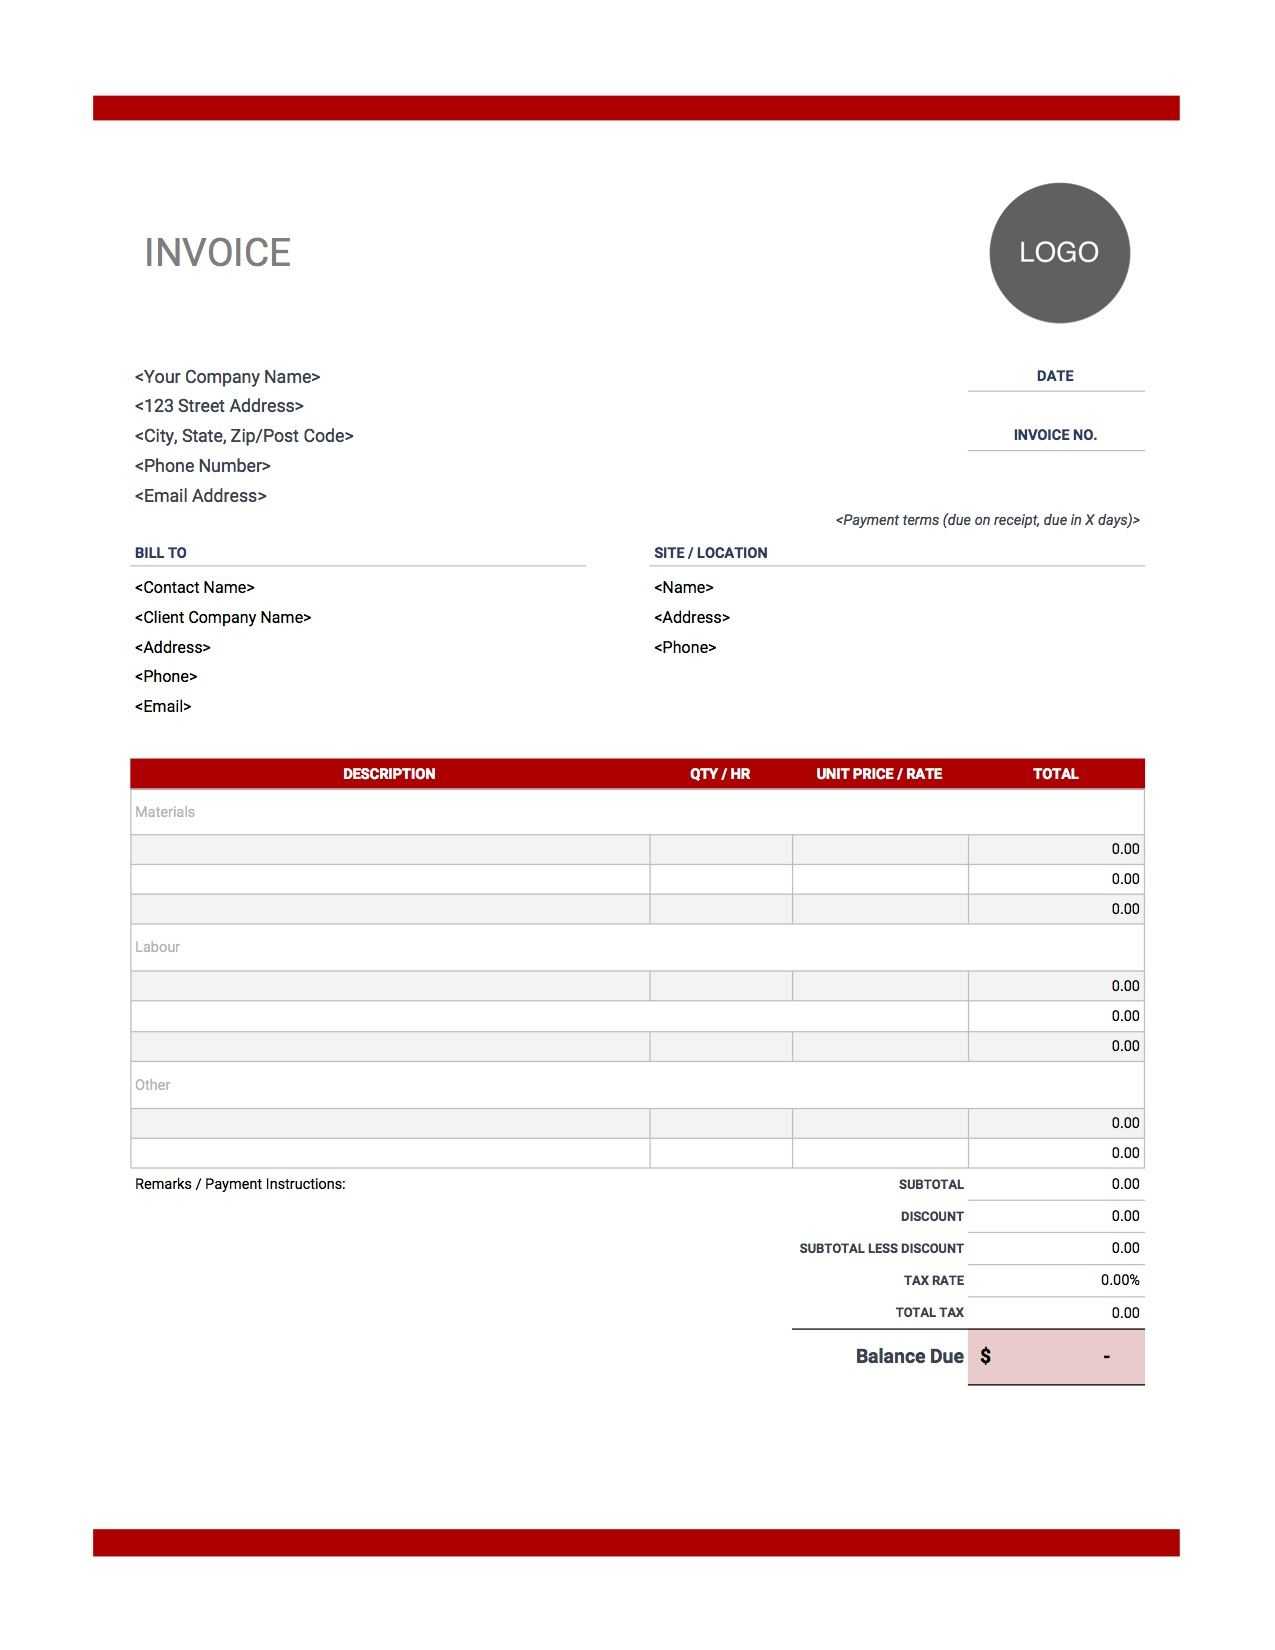 Contractor Invoice Templates | Free Download | Invoice Simple Throughout Contractors Invoices Free Templates